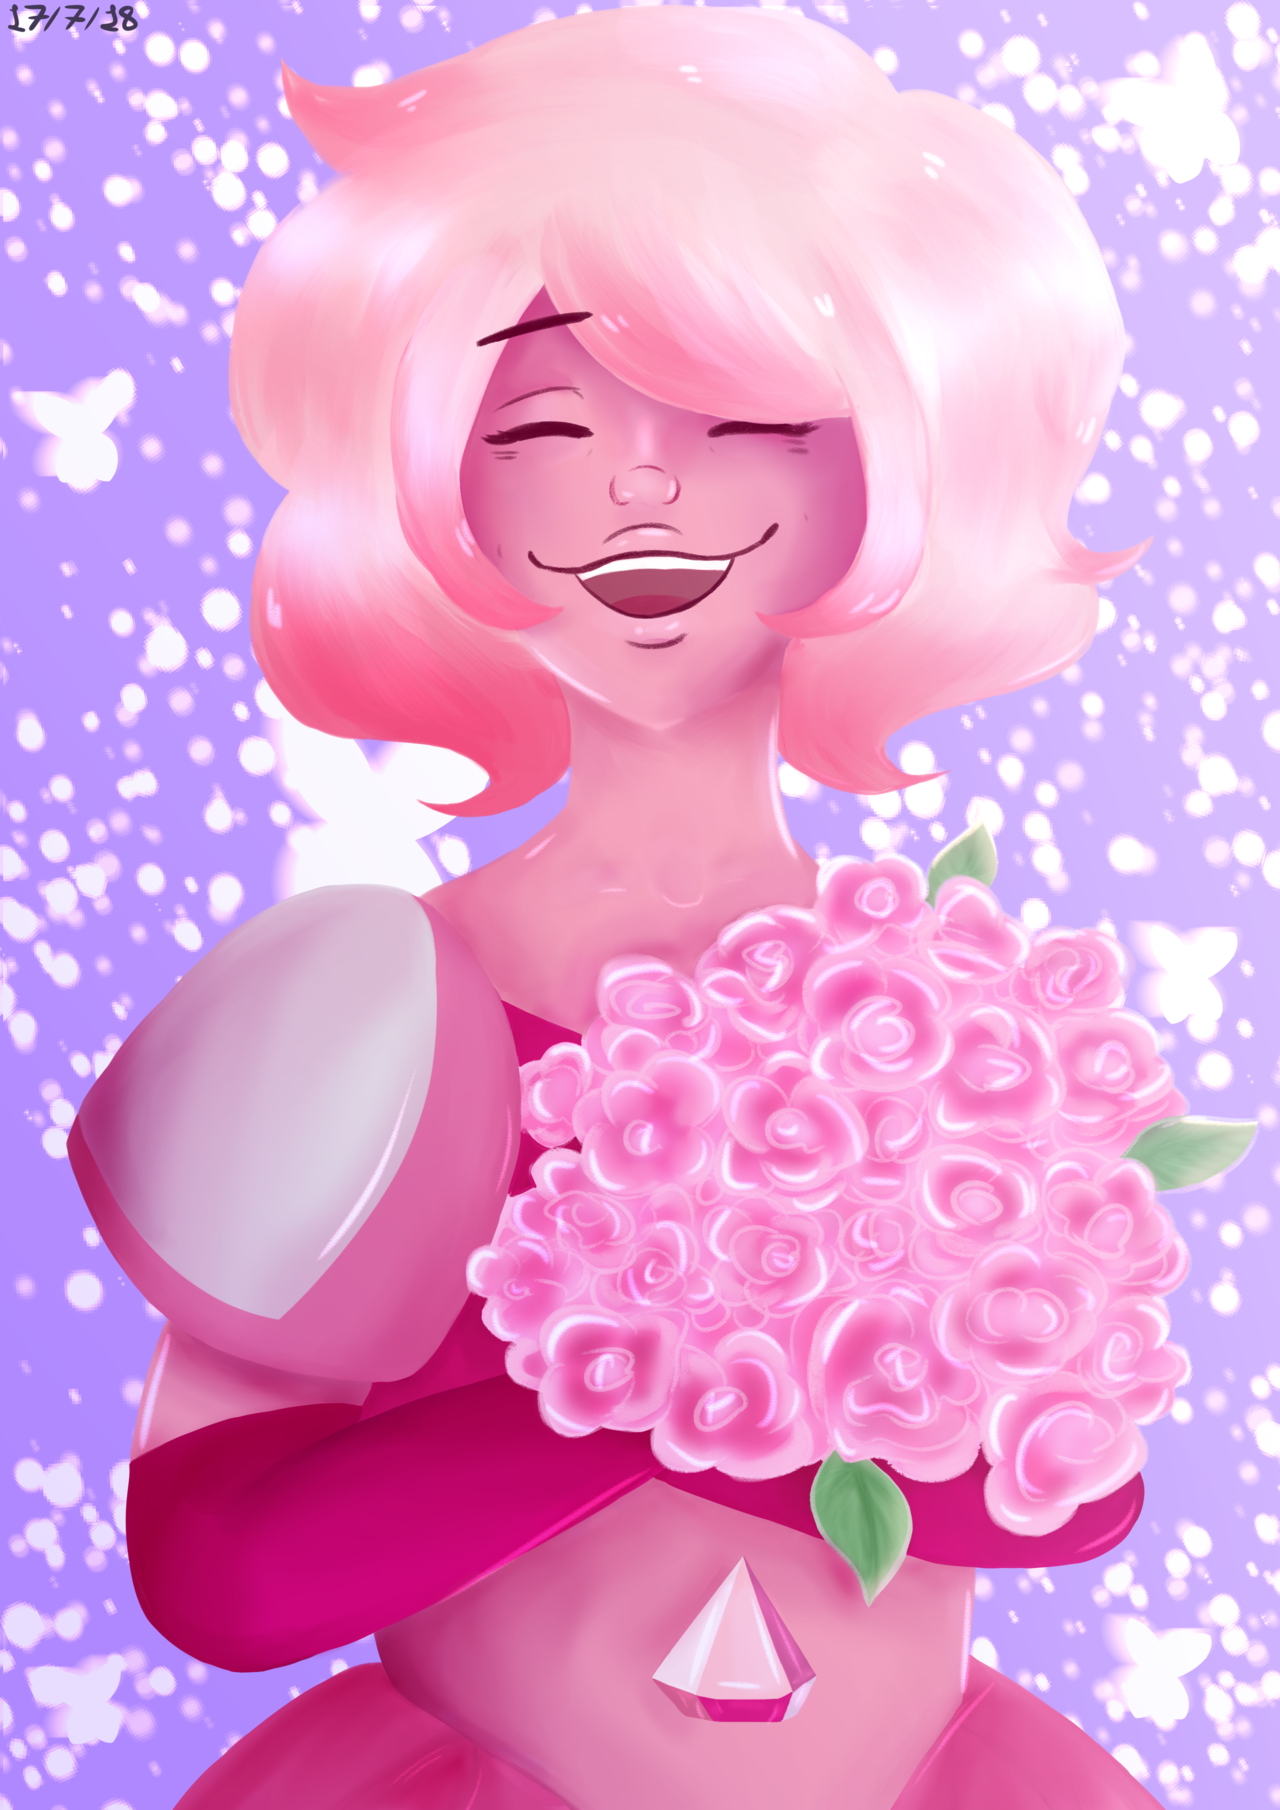 I love rose quartz Not to sure about painting though Speedpaint: HERE